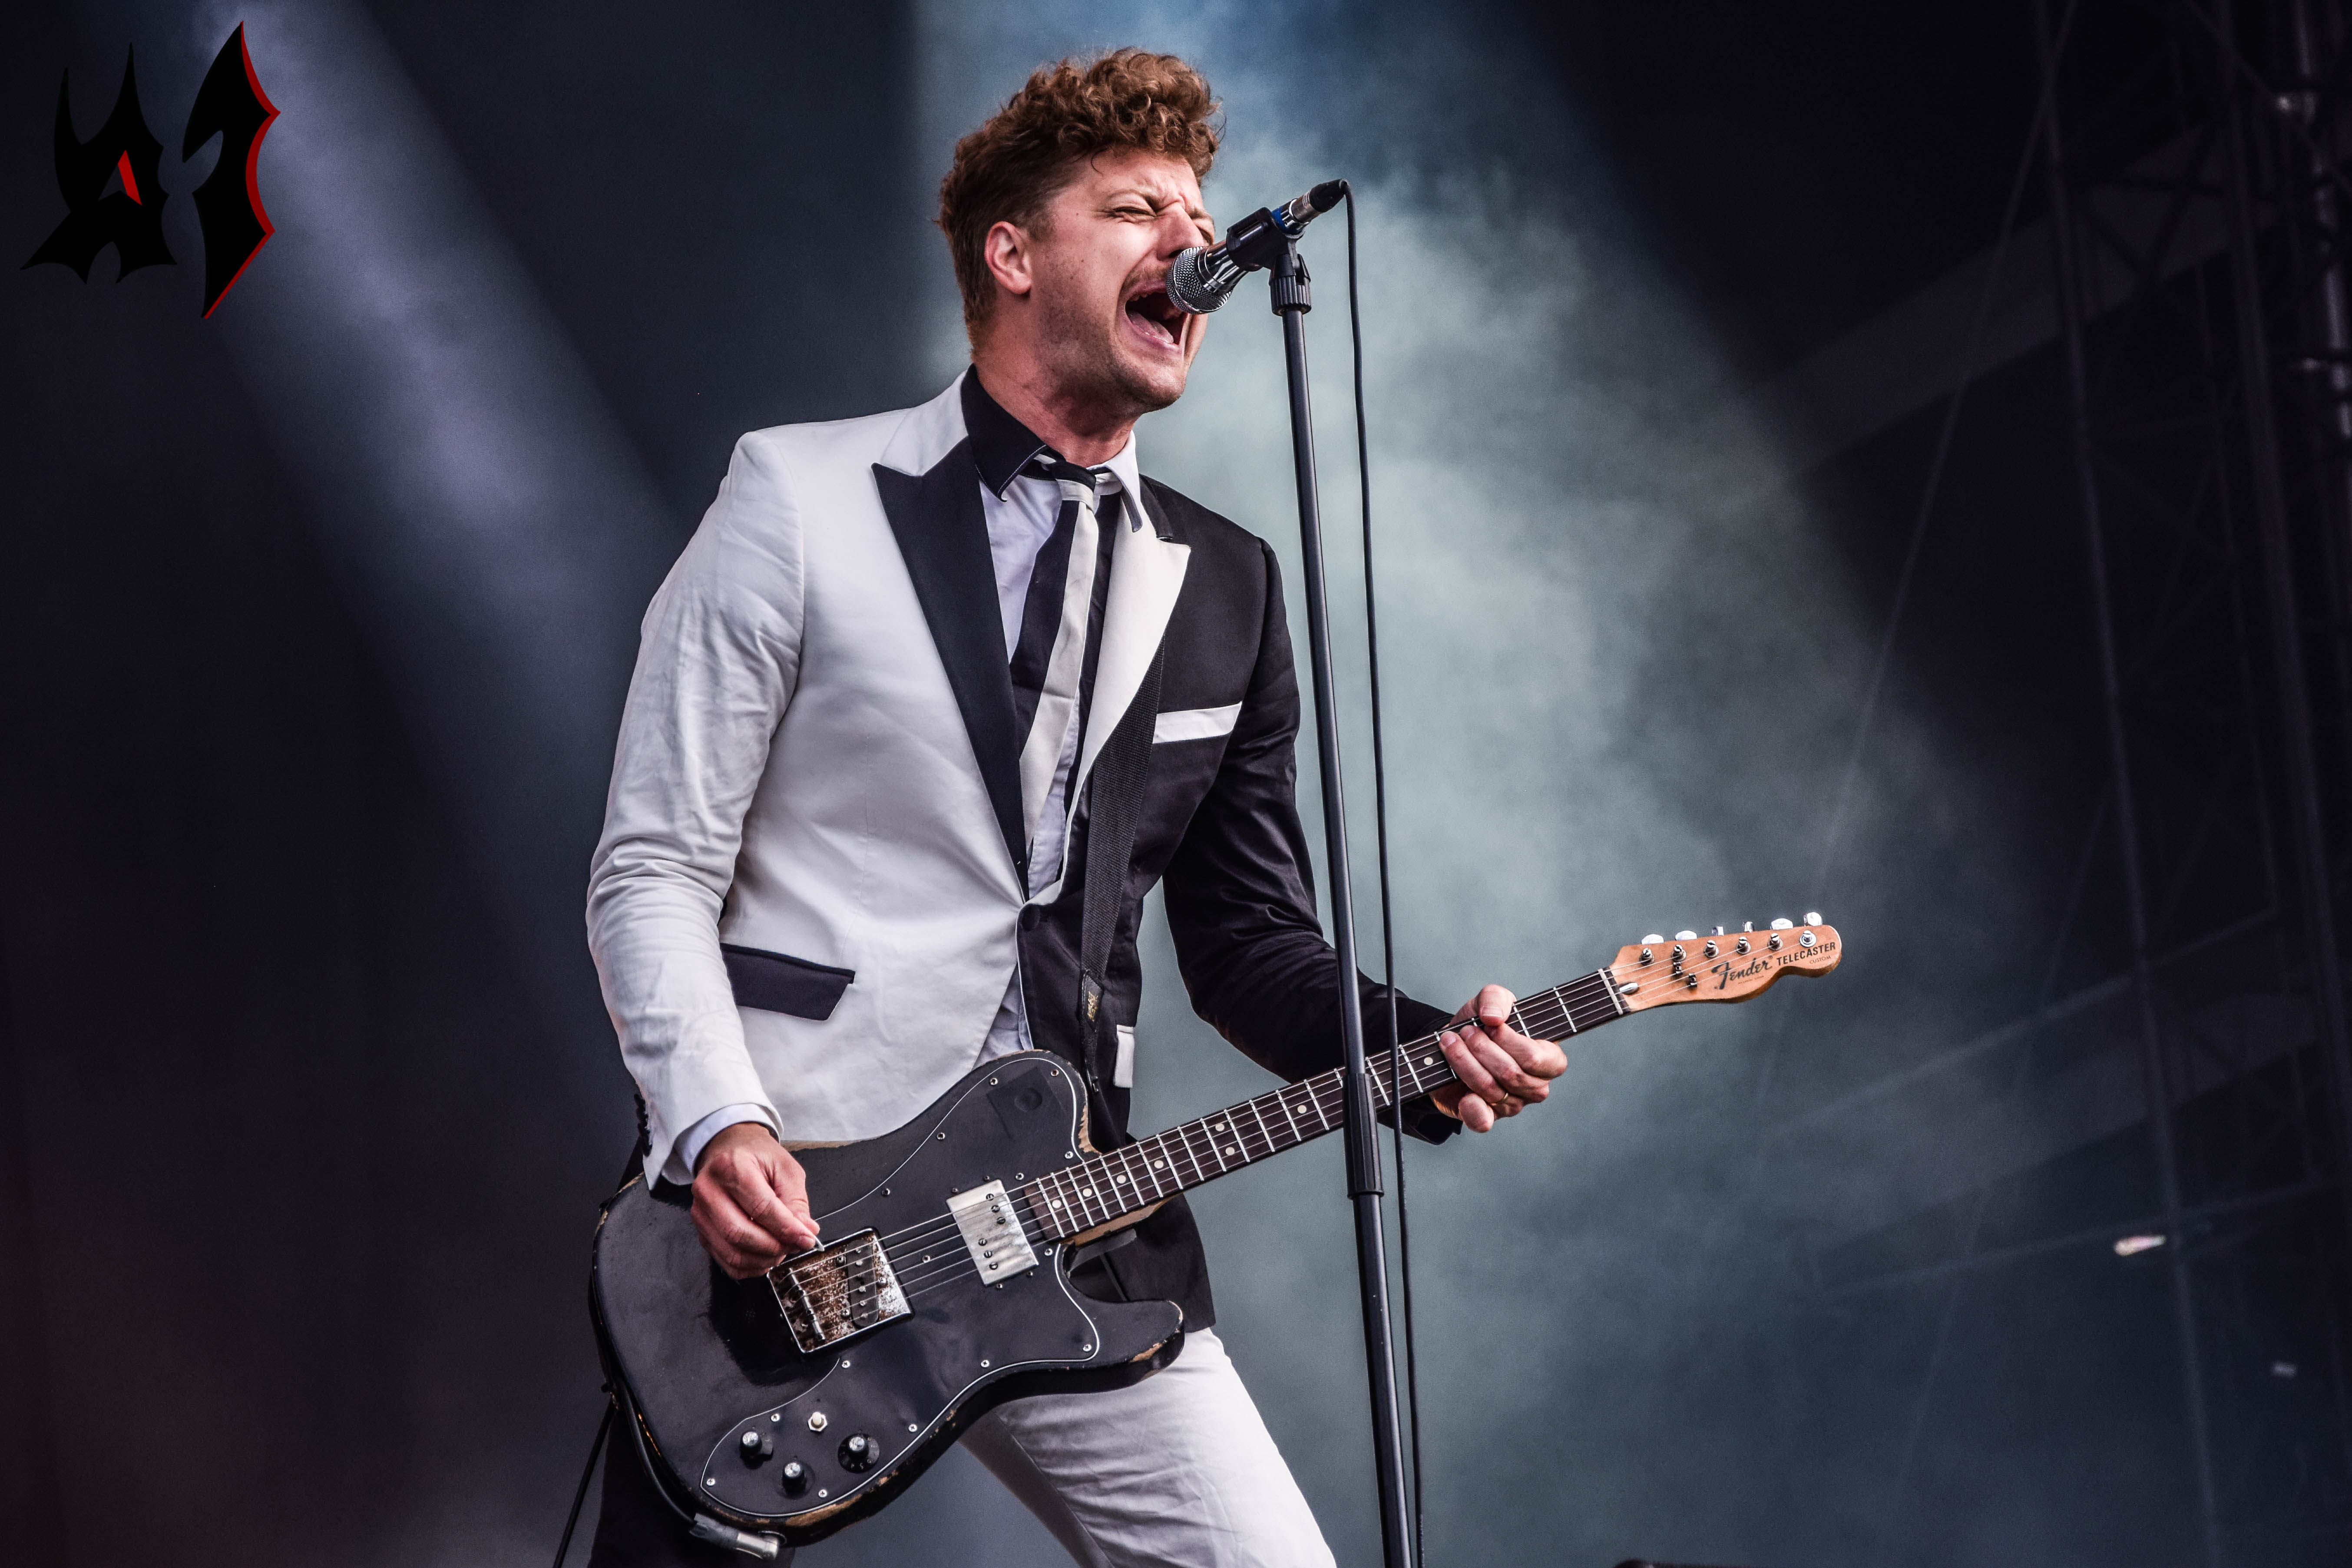 Donwload 2018 – Day 3 - The Hives 12